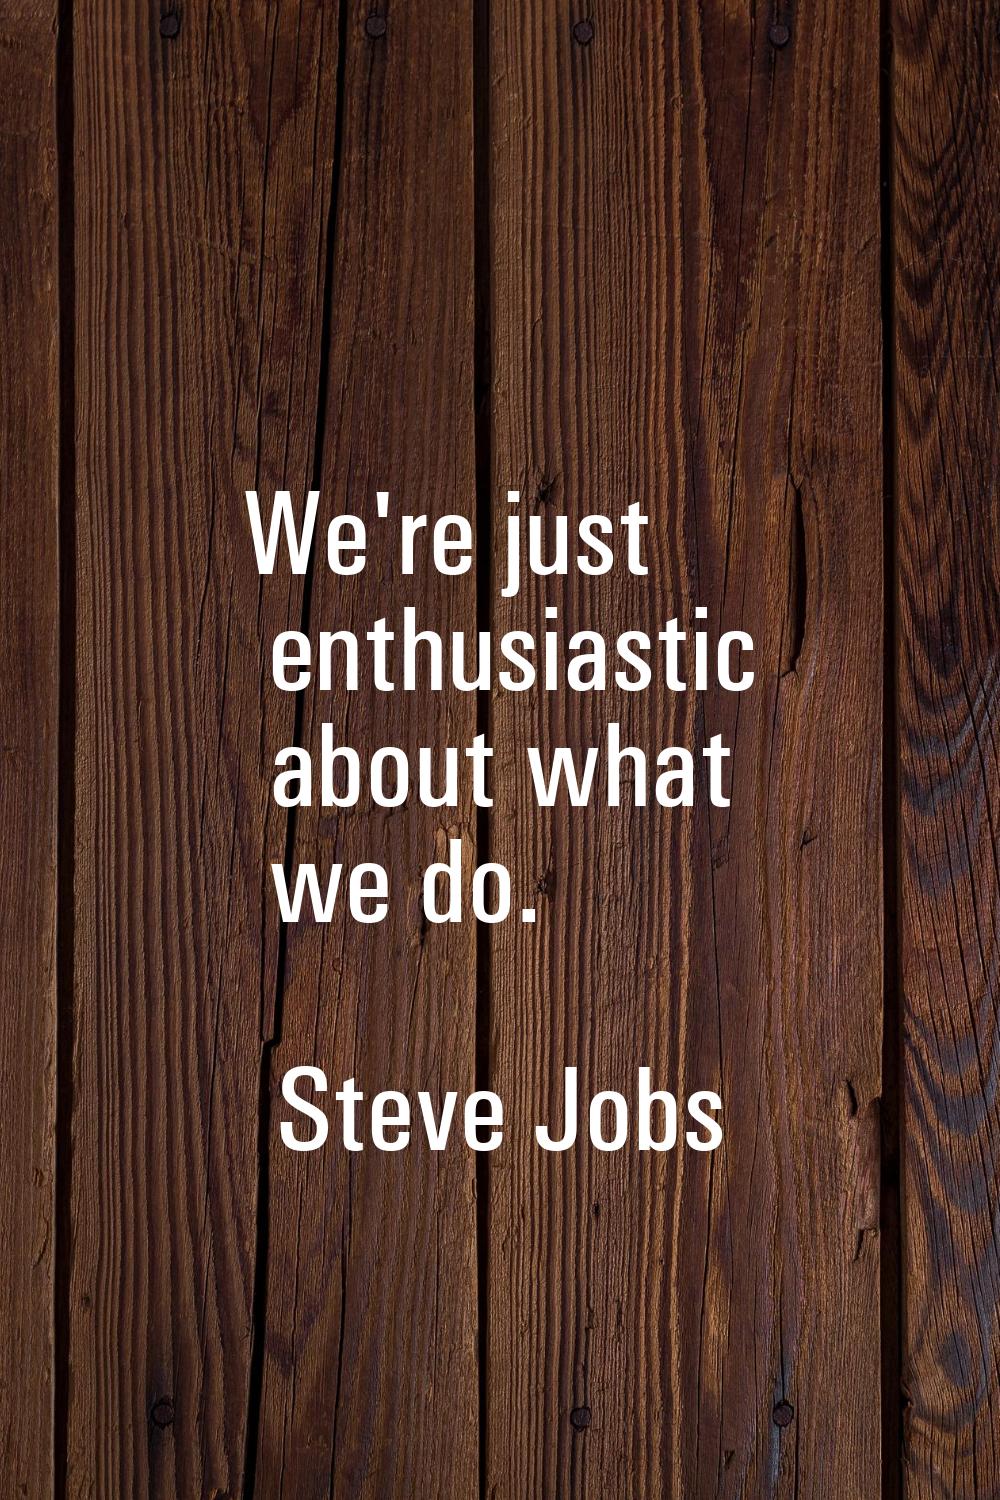 We're just enthusiastic about what we do.